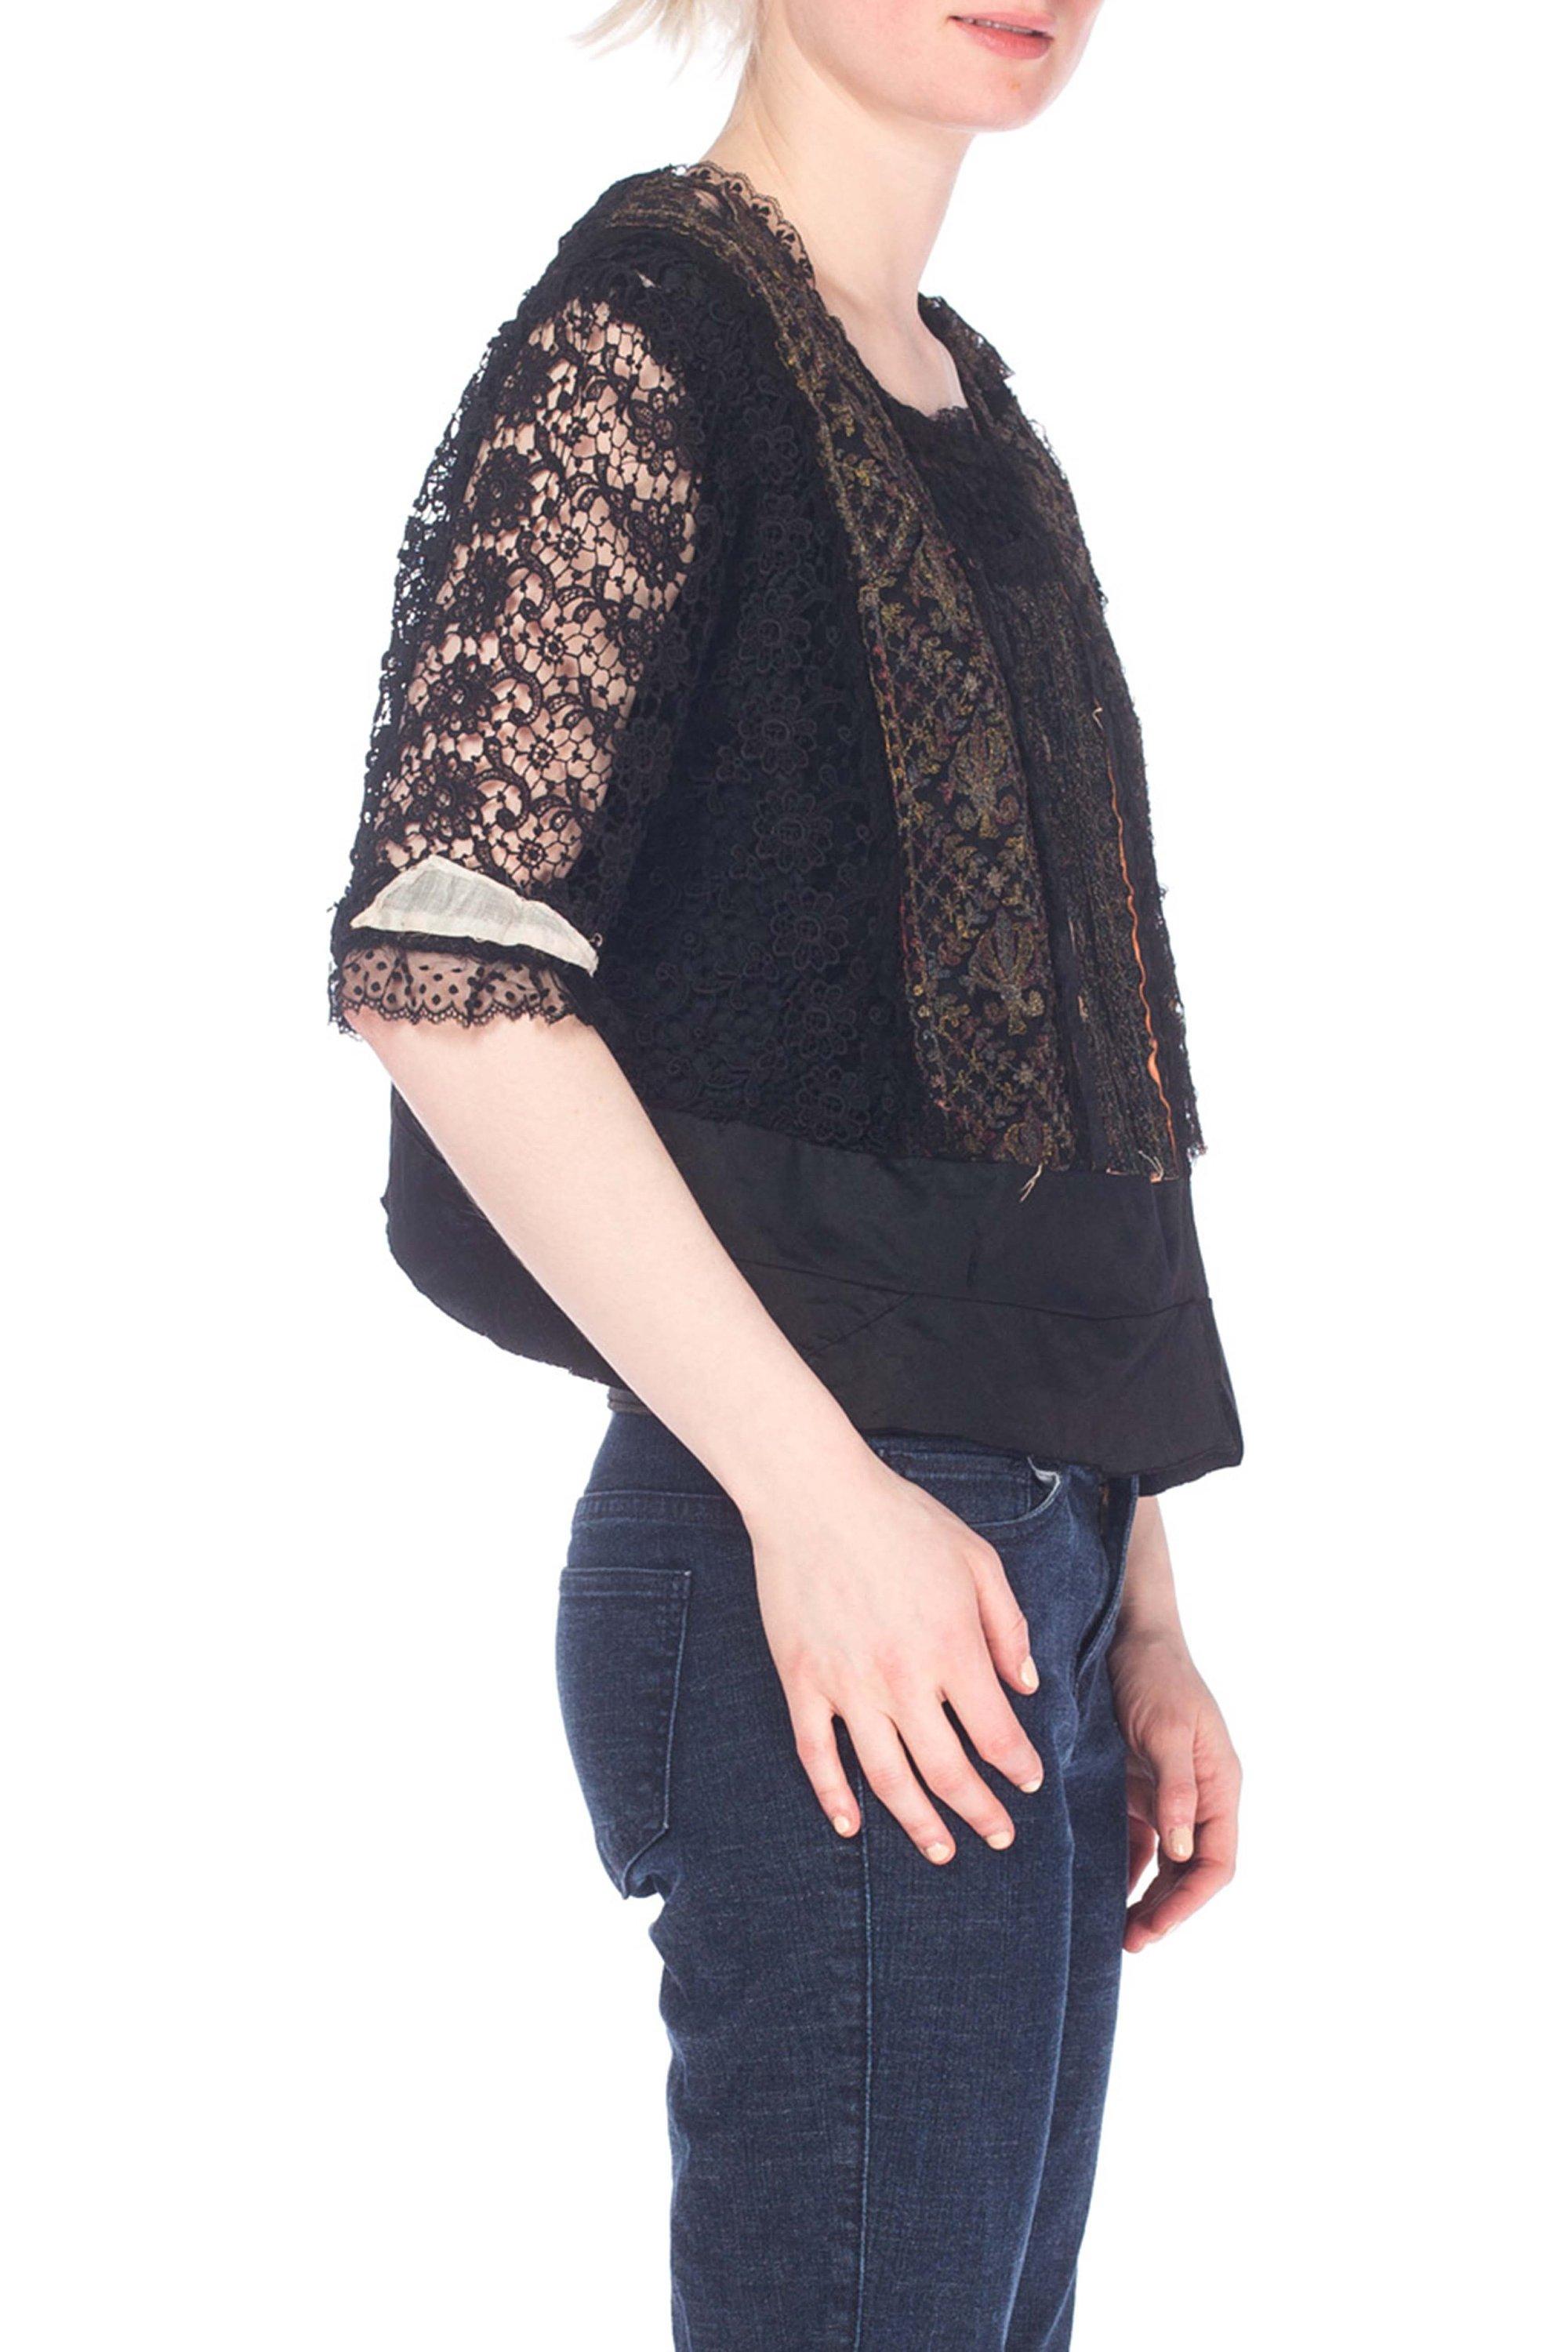 Edwardian Black Silk & Lace Top With Metallic Embroidery, As-Is In Excellent Condition For Sale In New York, NY